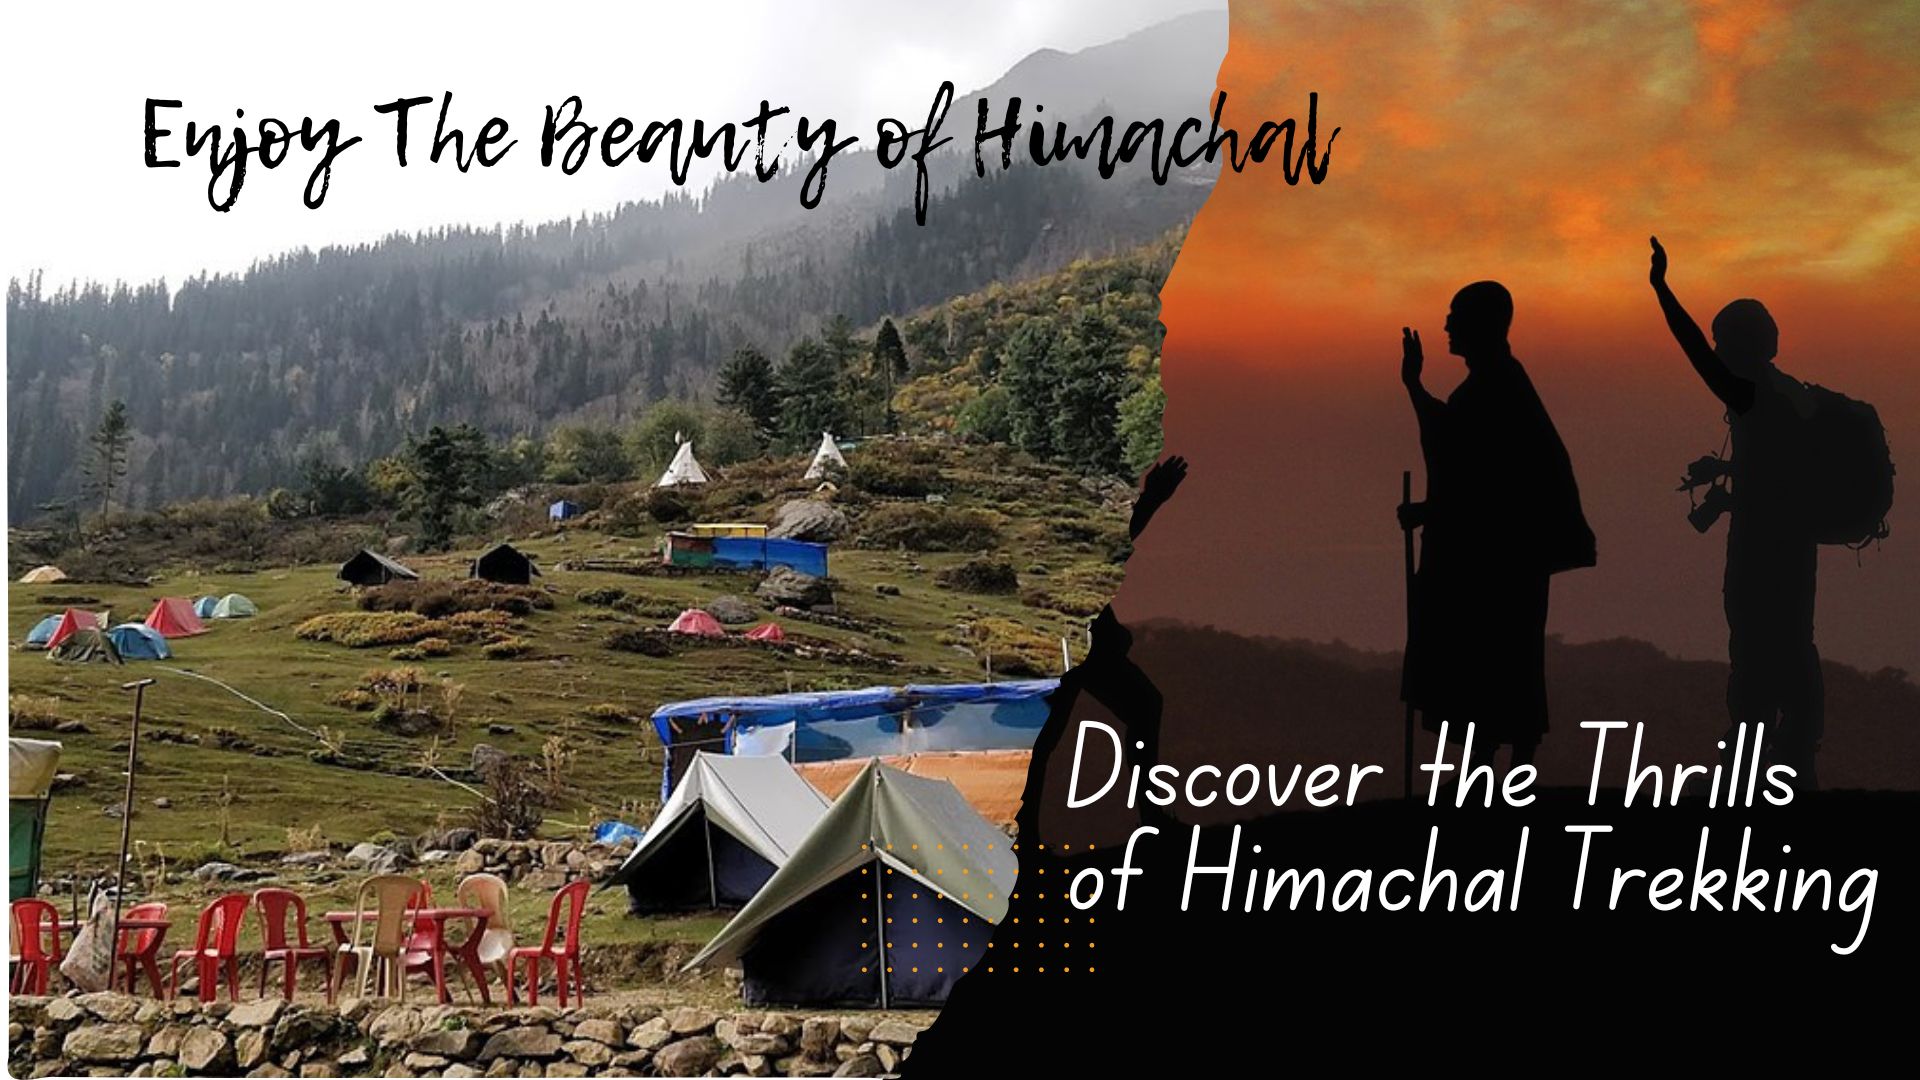 Discover the Thrills of Himachal Trekking